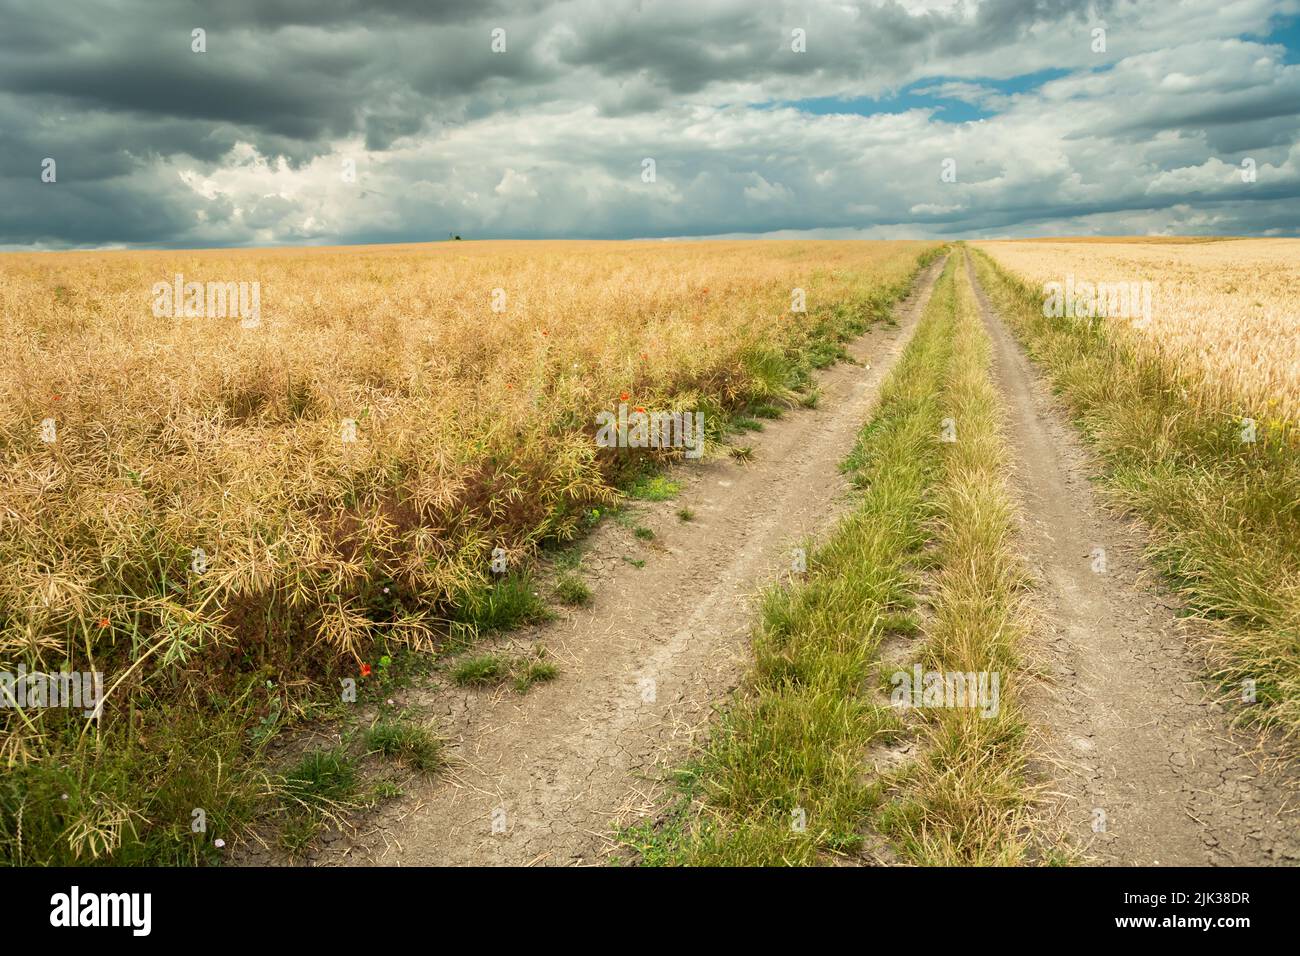 Dirt road through the grain fields and clouds in the sky Stock Photo